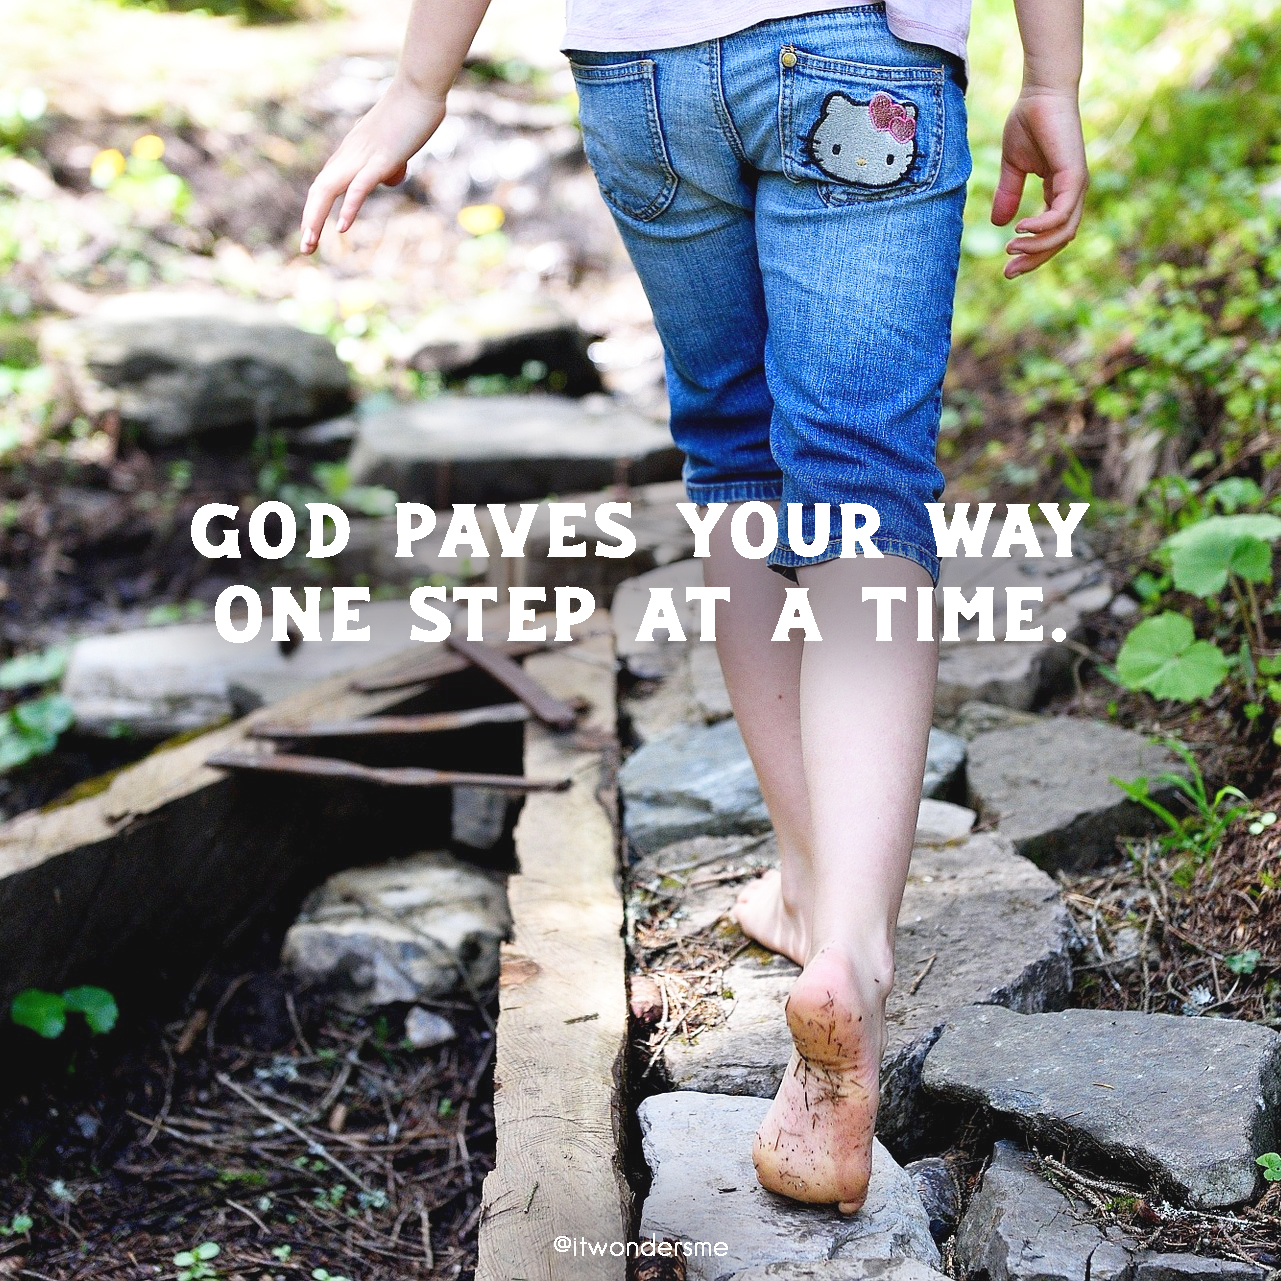 God paves your way one step at a time